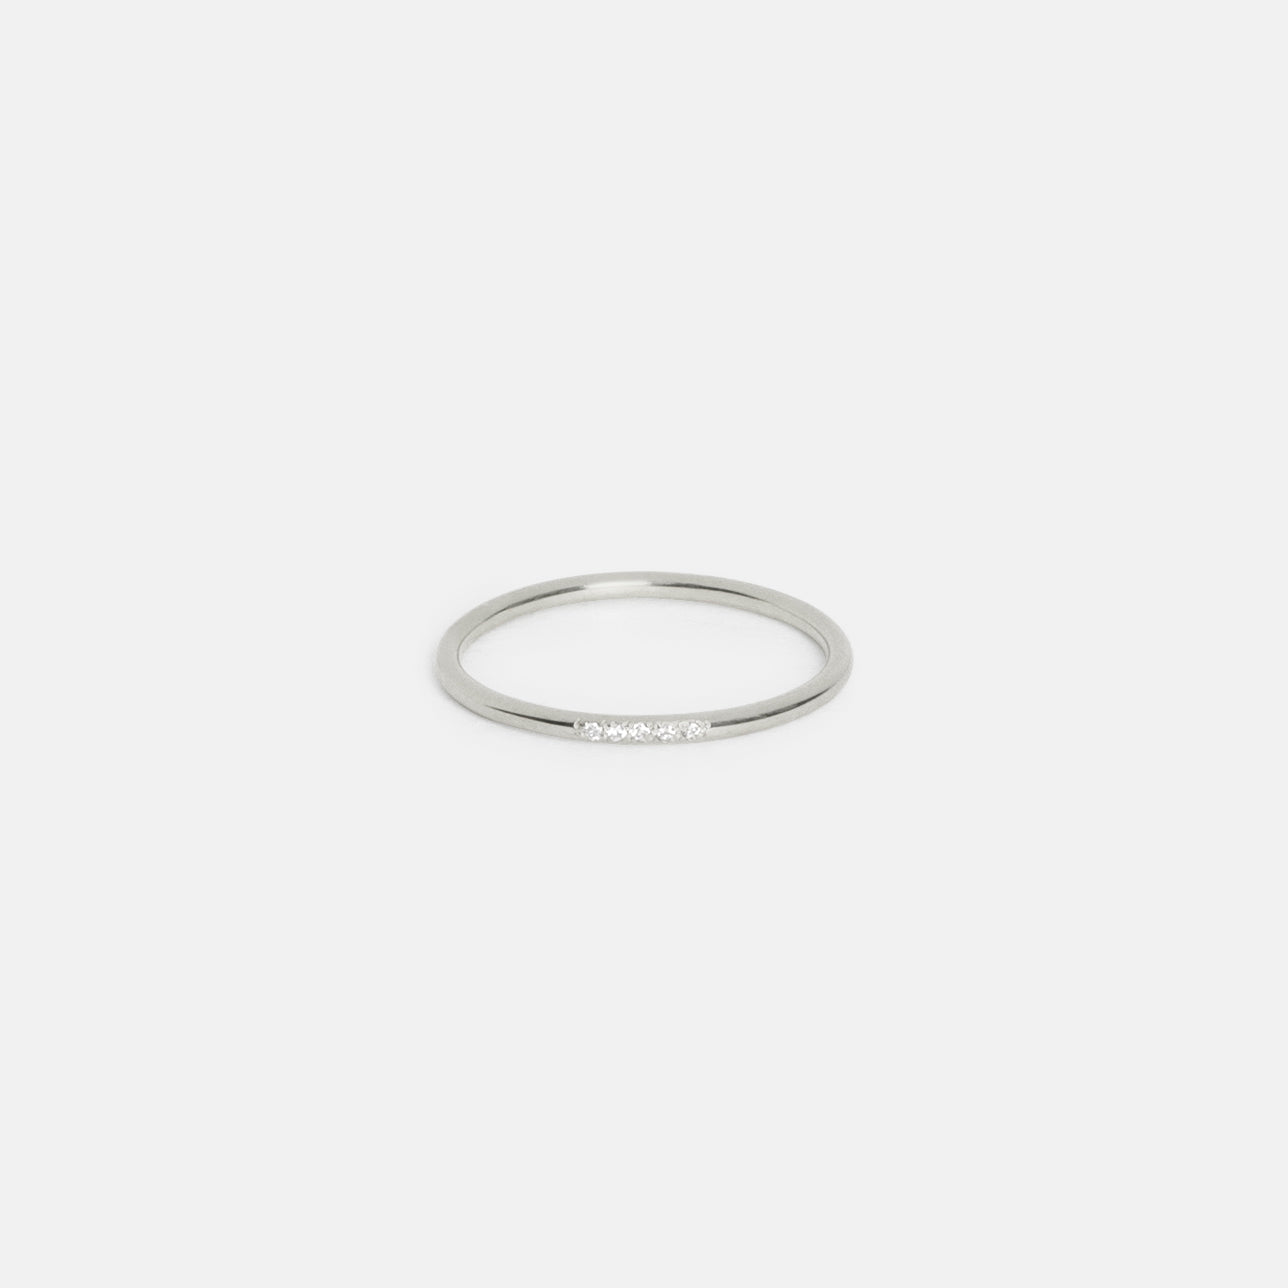 Eiga Thin Ring in 14k White Gold set with White Diamonds By SHW Fine Jewelry NYC